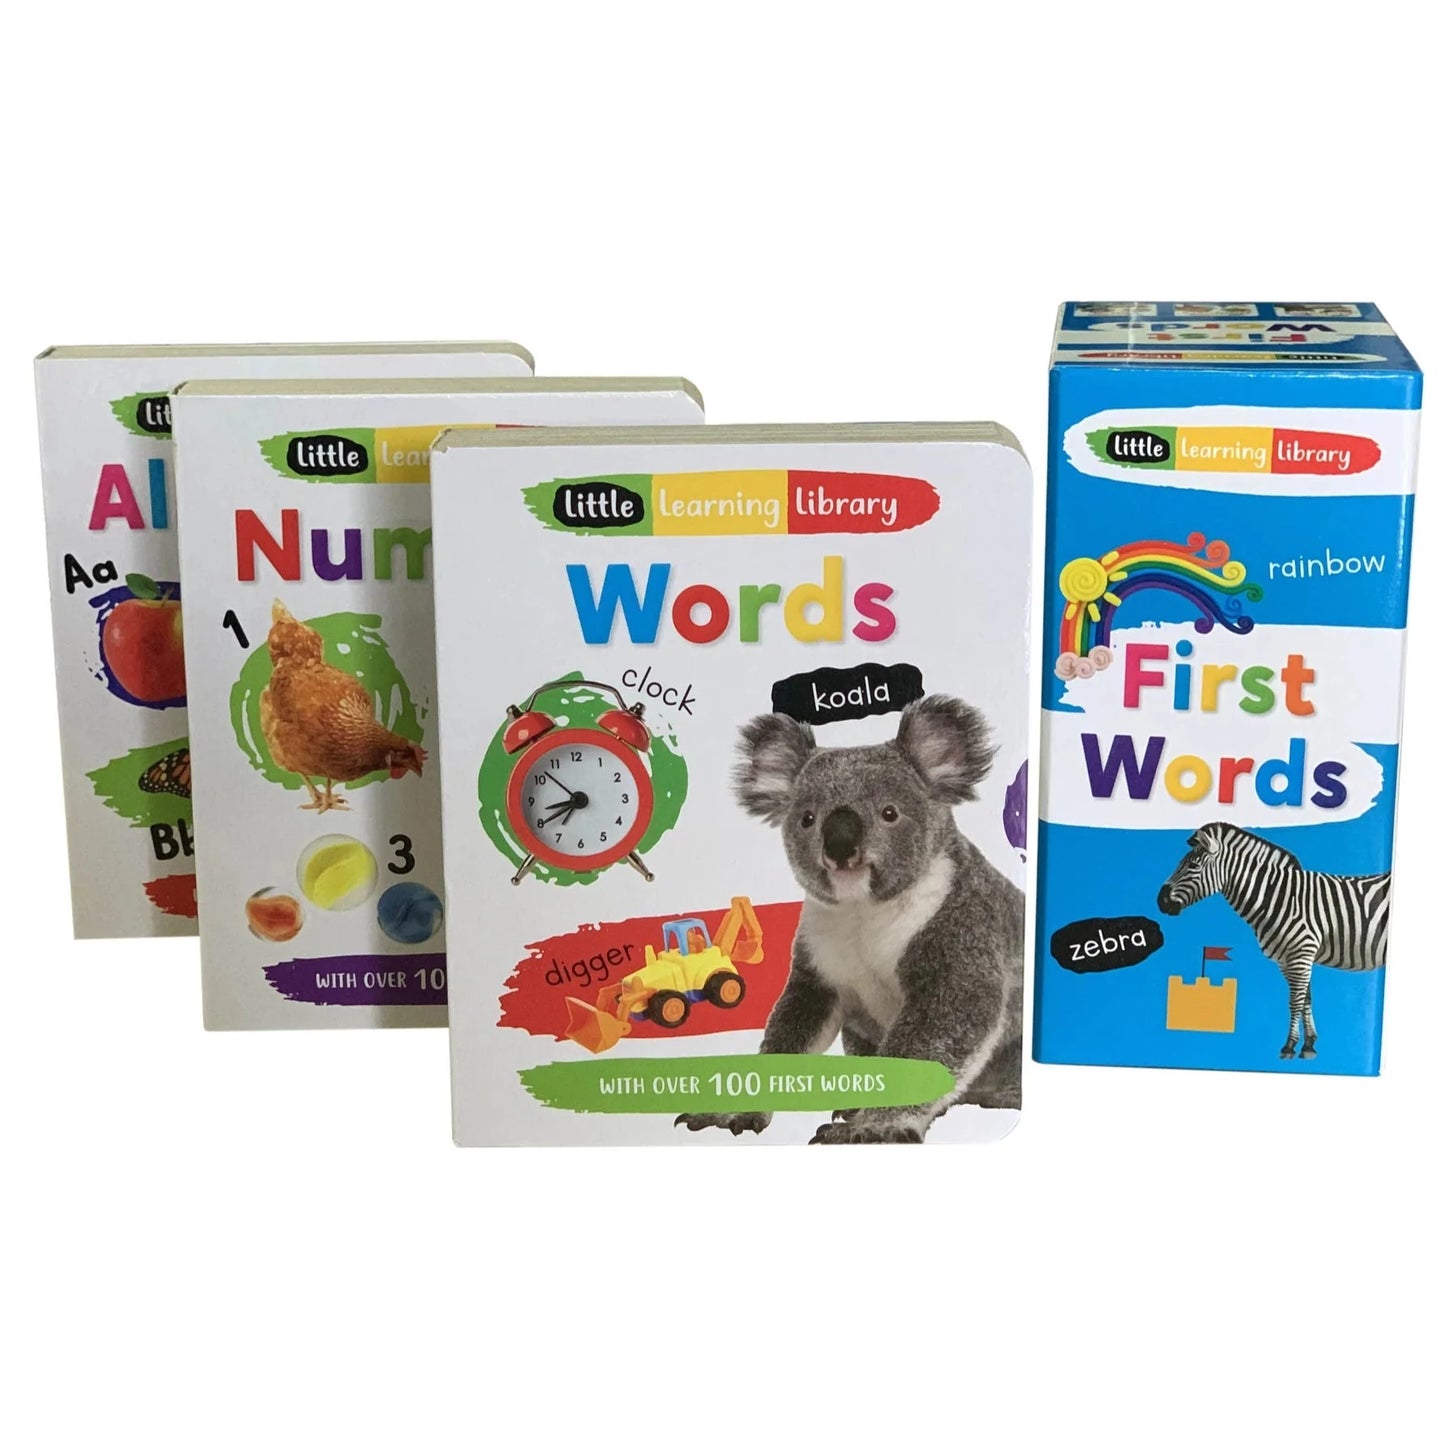 Little Learning Library First Words 3 Board Books Slipcase